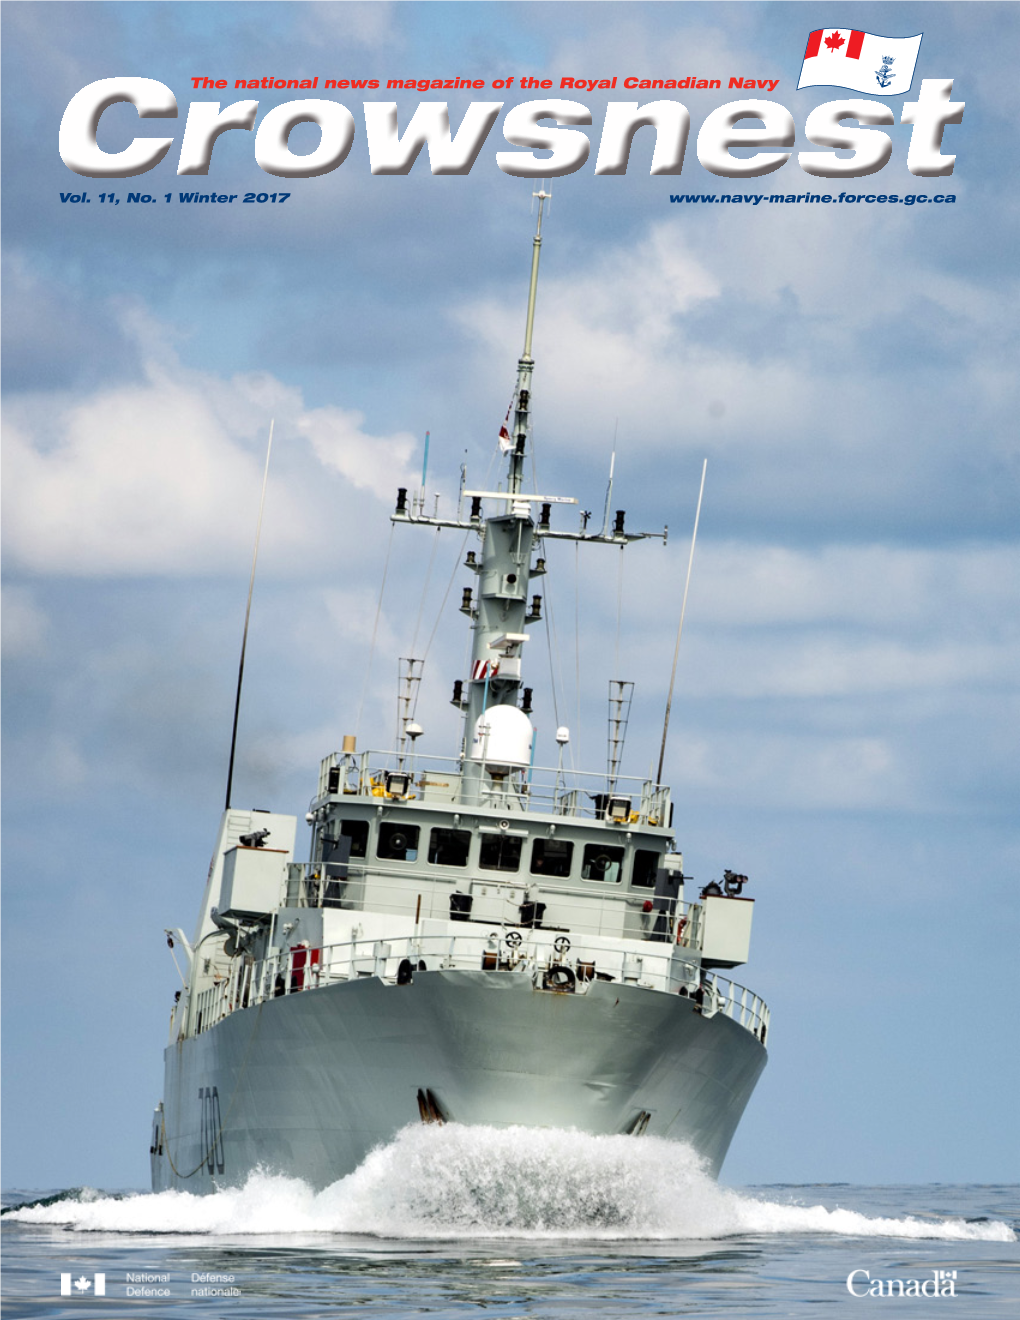 The National News Magazine of the Royal Canadian Navy